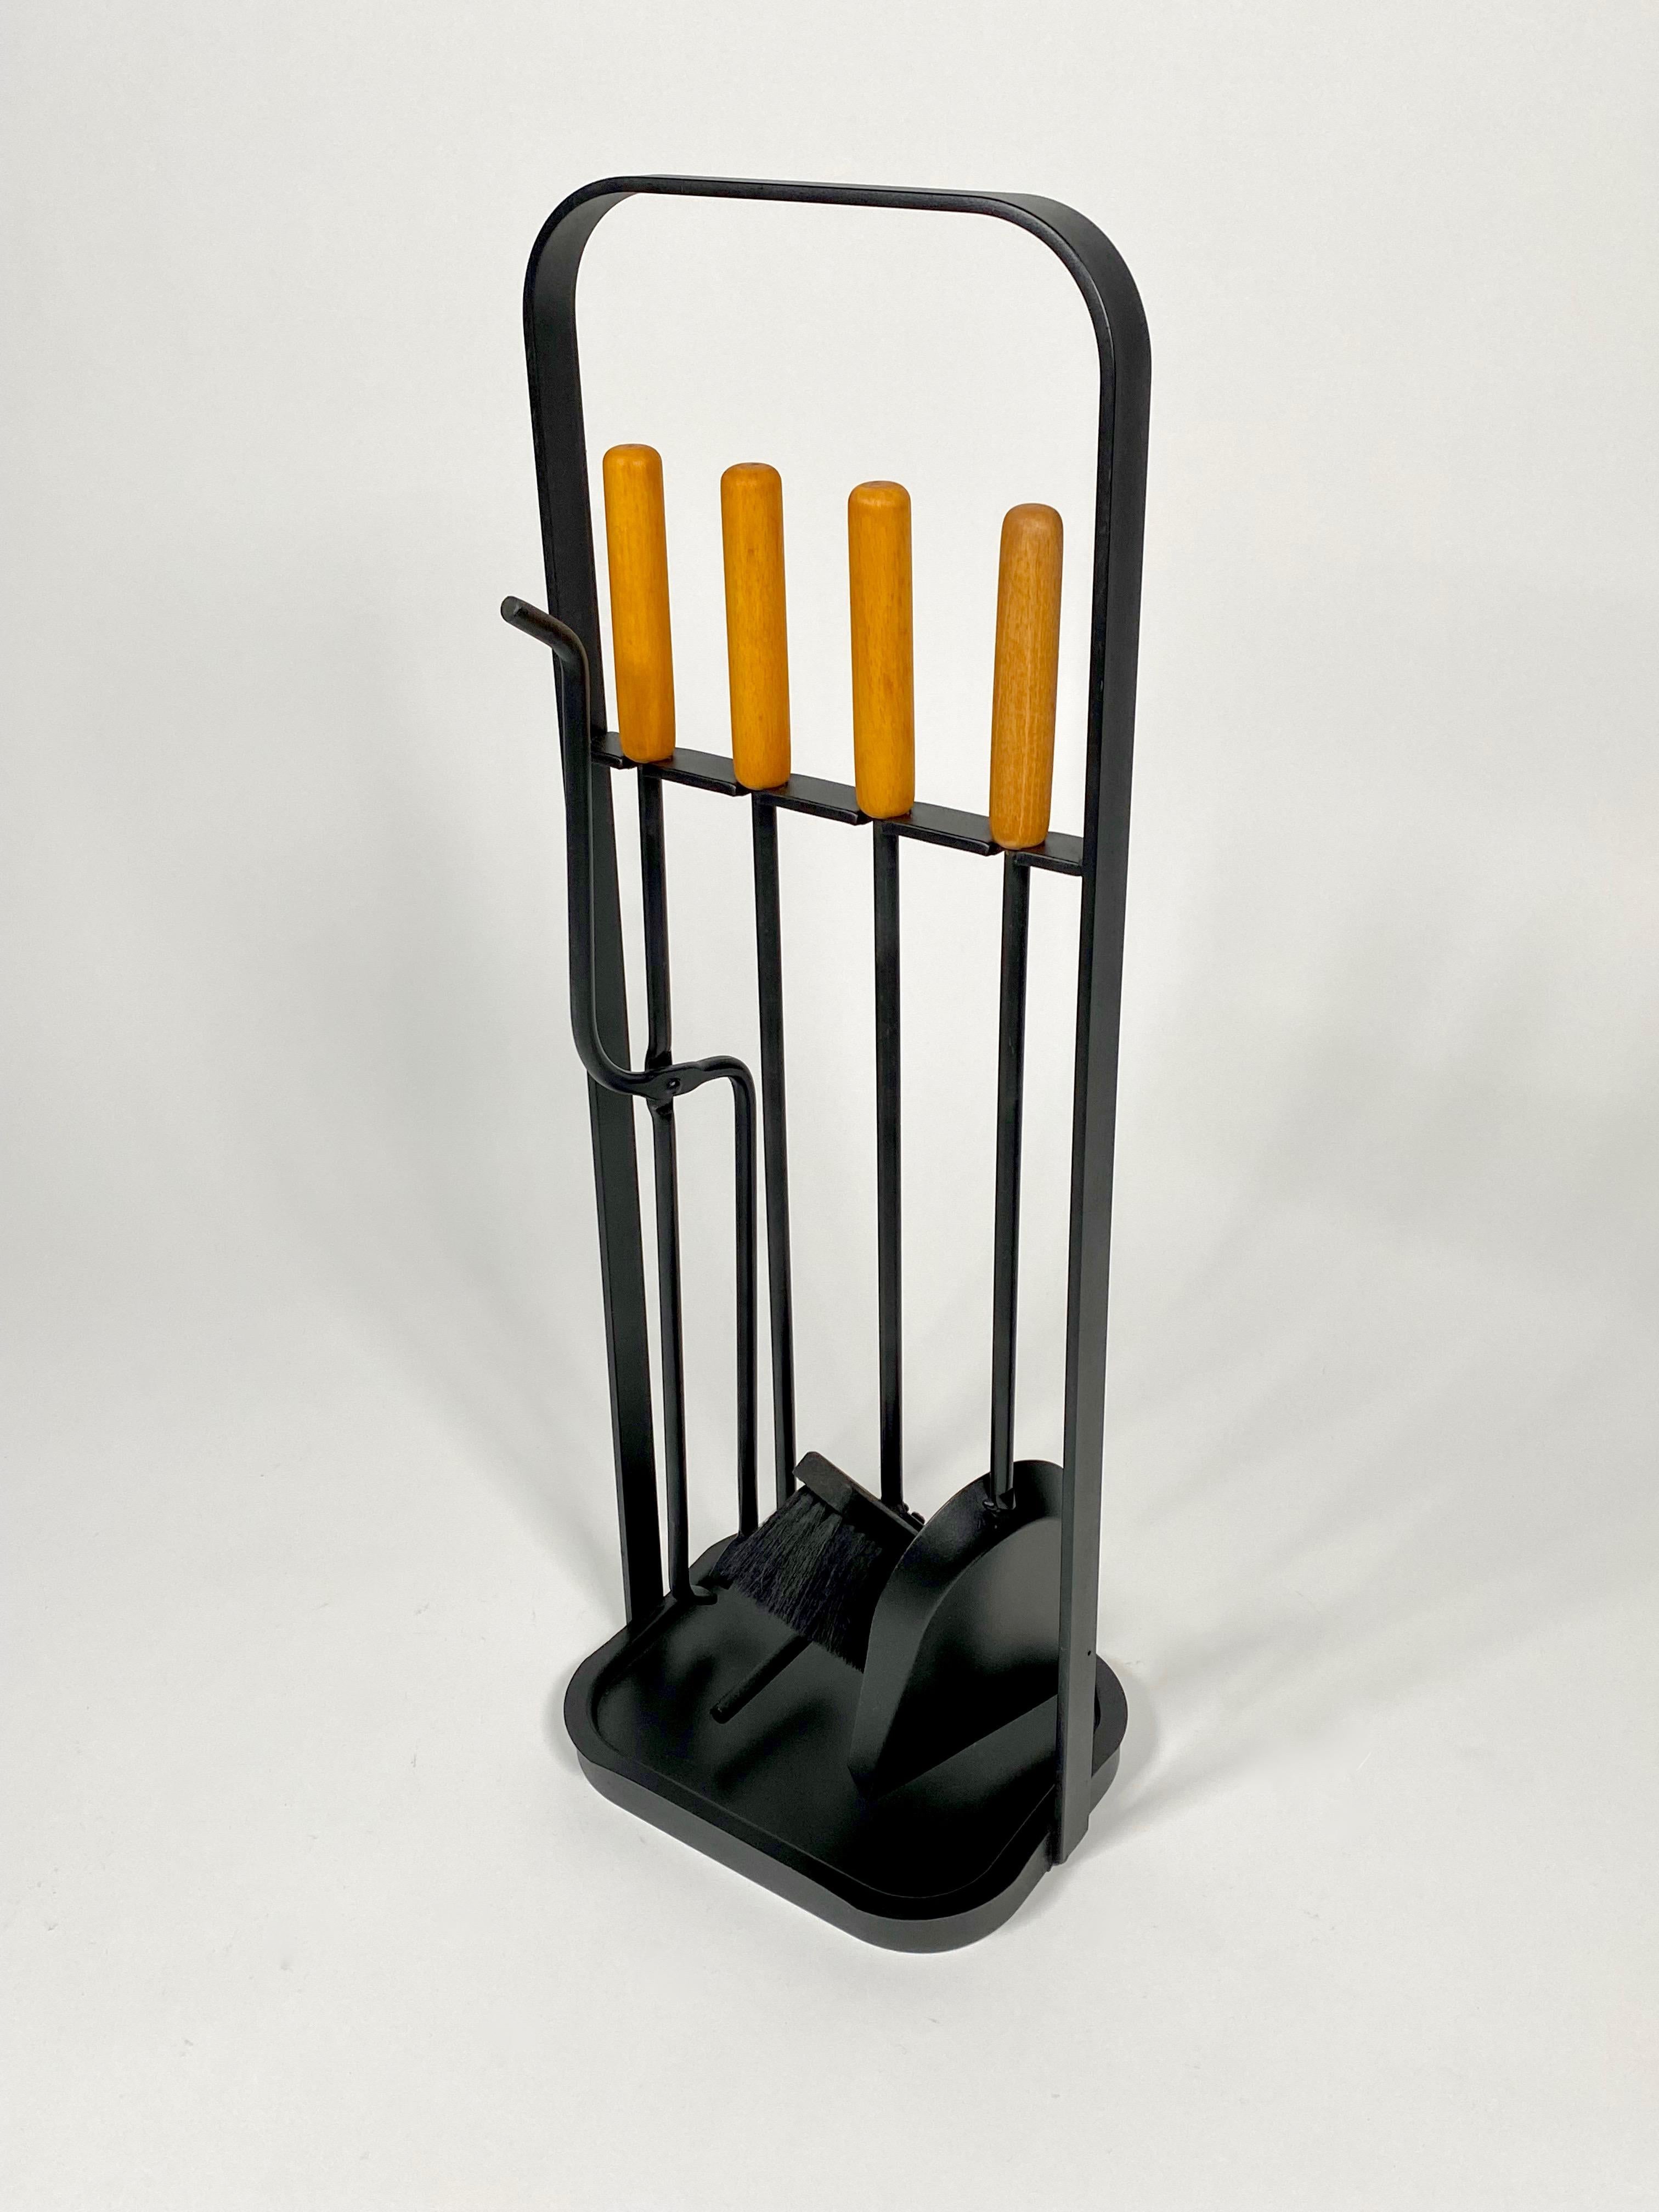 1960s Modernist fireplace tools the consist of a dust pan, brush, poker and log grabber, freshly painted black with amber colored beechwood handles, super clean design for many a fireplace. Can be used with or without catch tray on the holder,